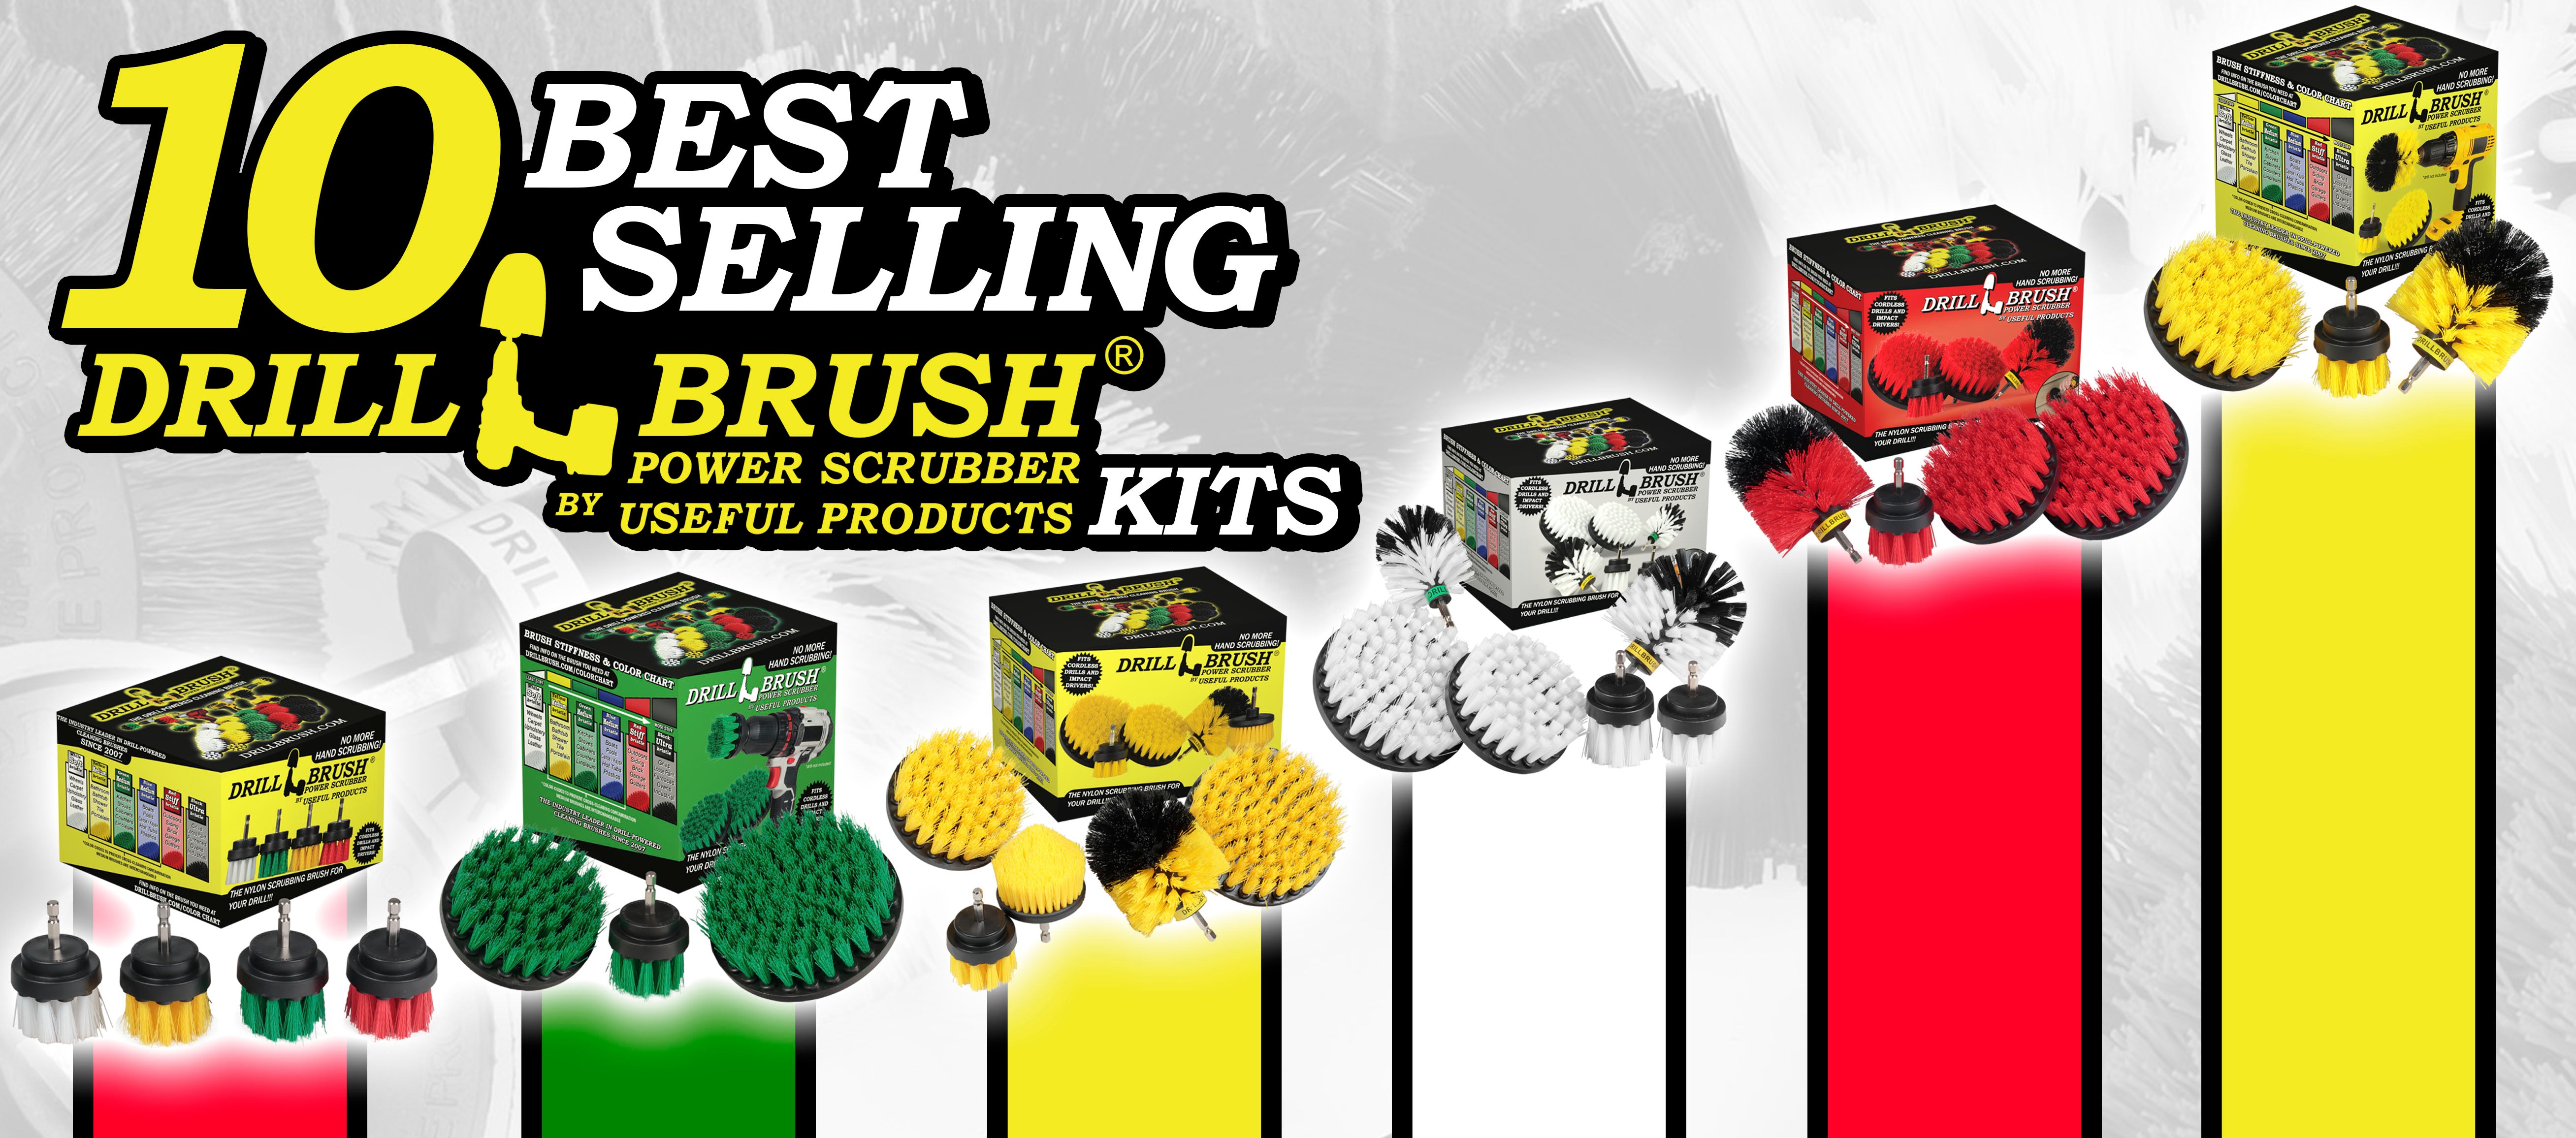 The 10 Best Selling Types of Drillbrush Kits